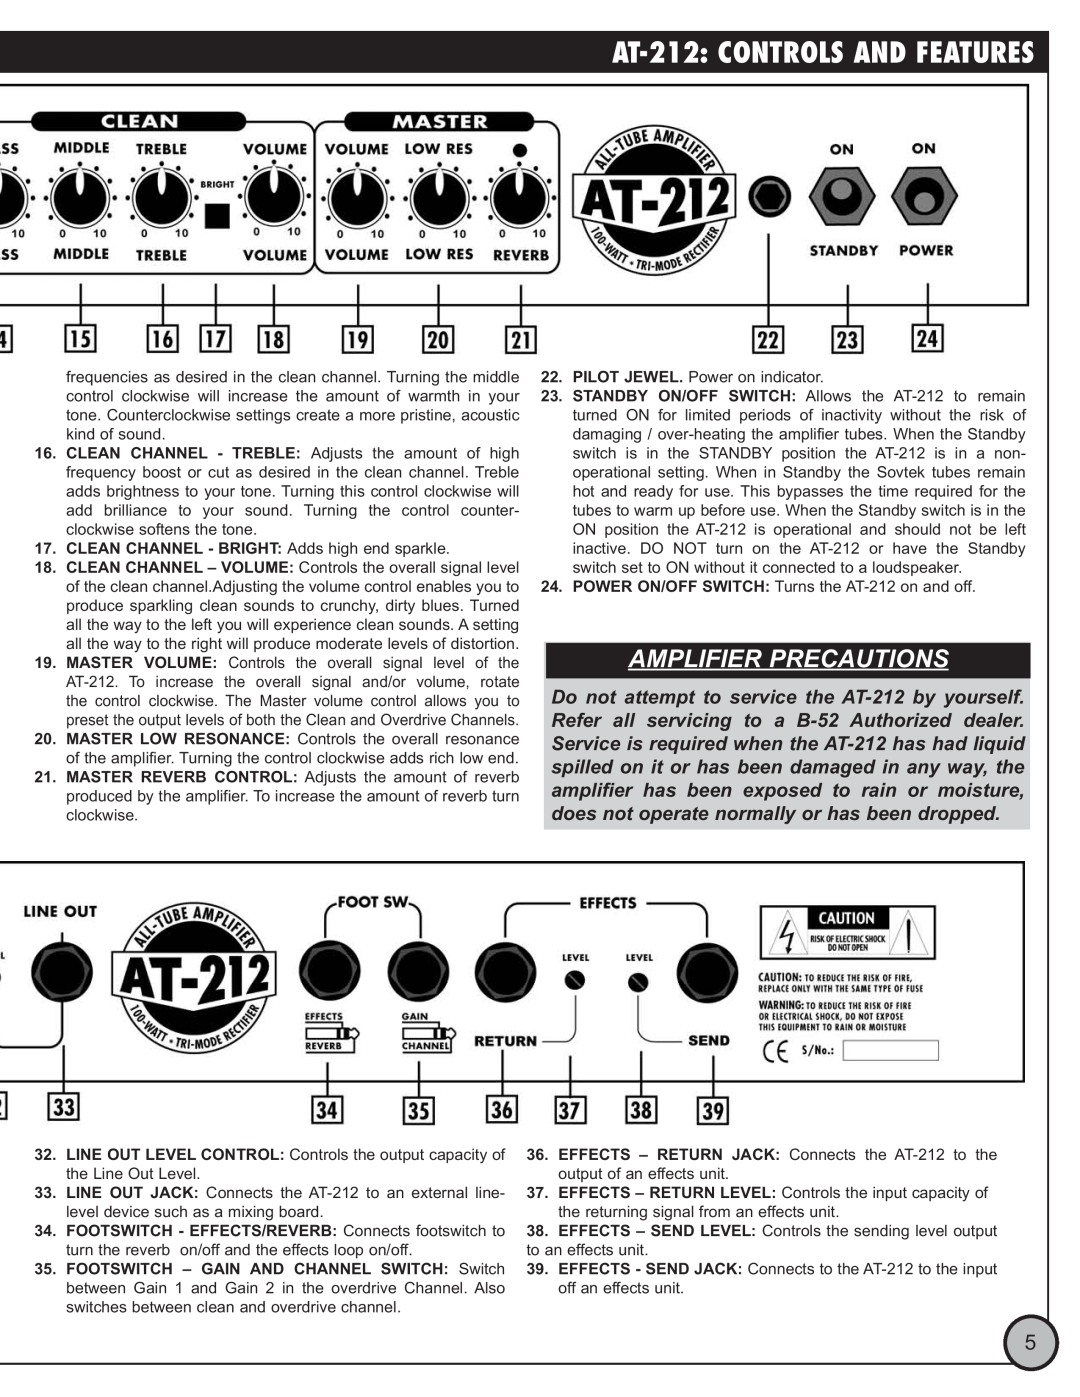 ETI Sound Systems, INC manual AT-212 CONTROLS AND FEATURES, Amplifier Precautions 